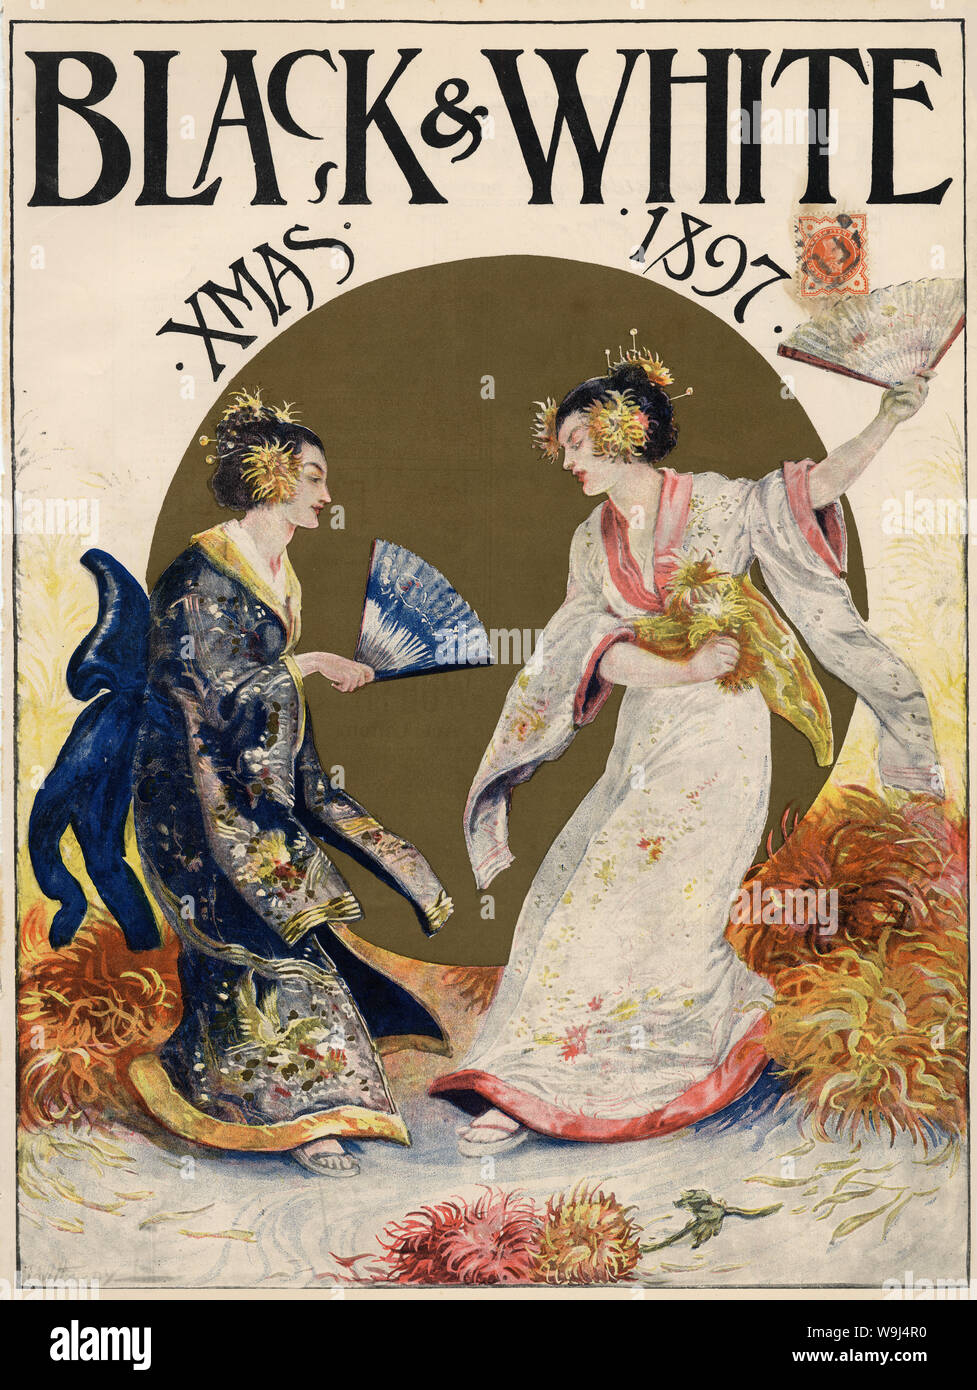 [ 1890s Japan - Japonisme: Western Women in Japanese Kimono ] —   Cover of the Christmas number of the British weekly illustrated newspaper Black & White published on November 15, 1897 (Meiji  30). It shows two Western women in kimono dancing with fans amid chrysanthemums. In the back is a golden sun. There is a stamp on the right of 1897.  19th century vintage newspaper illustration. Stock Photo